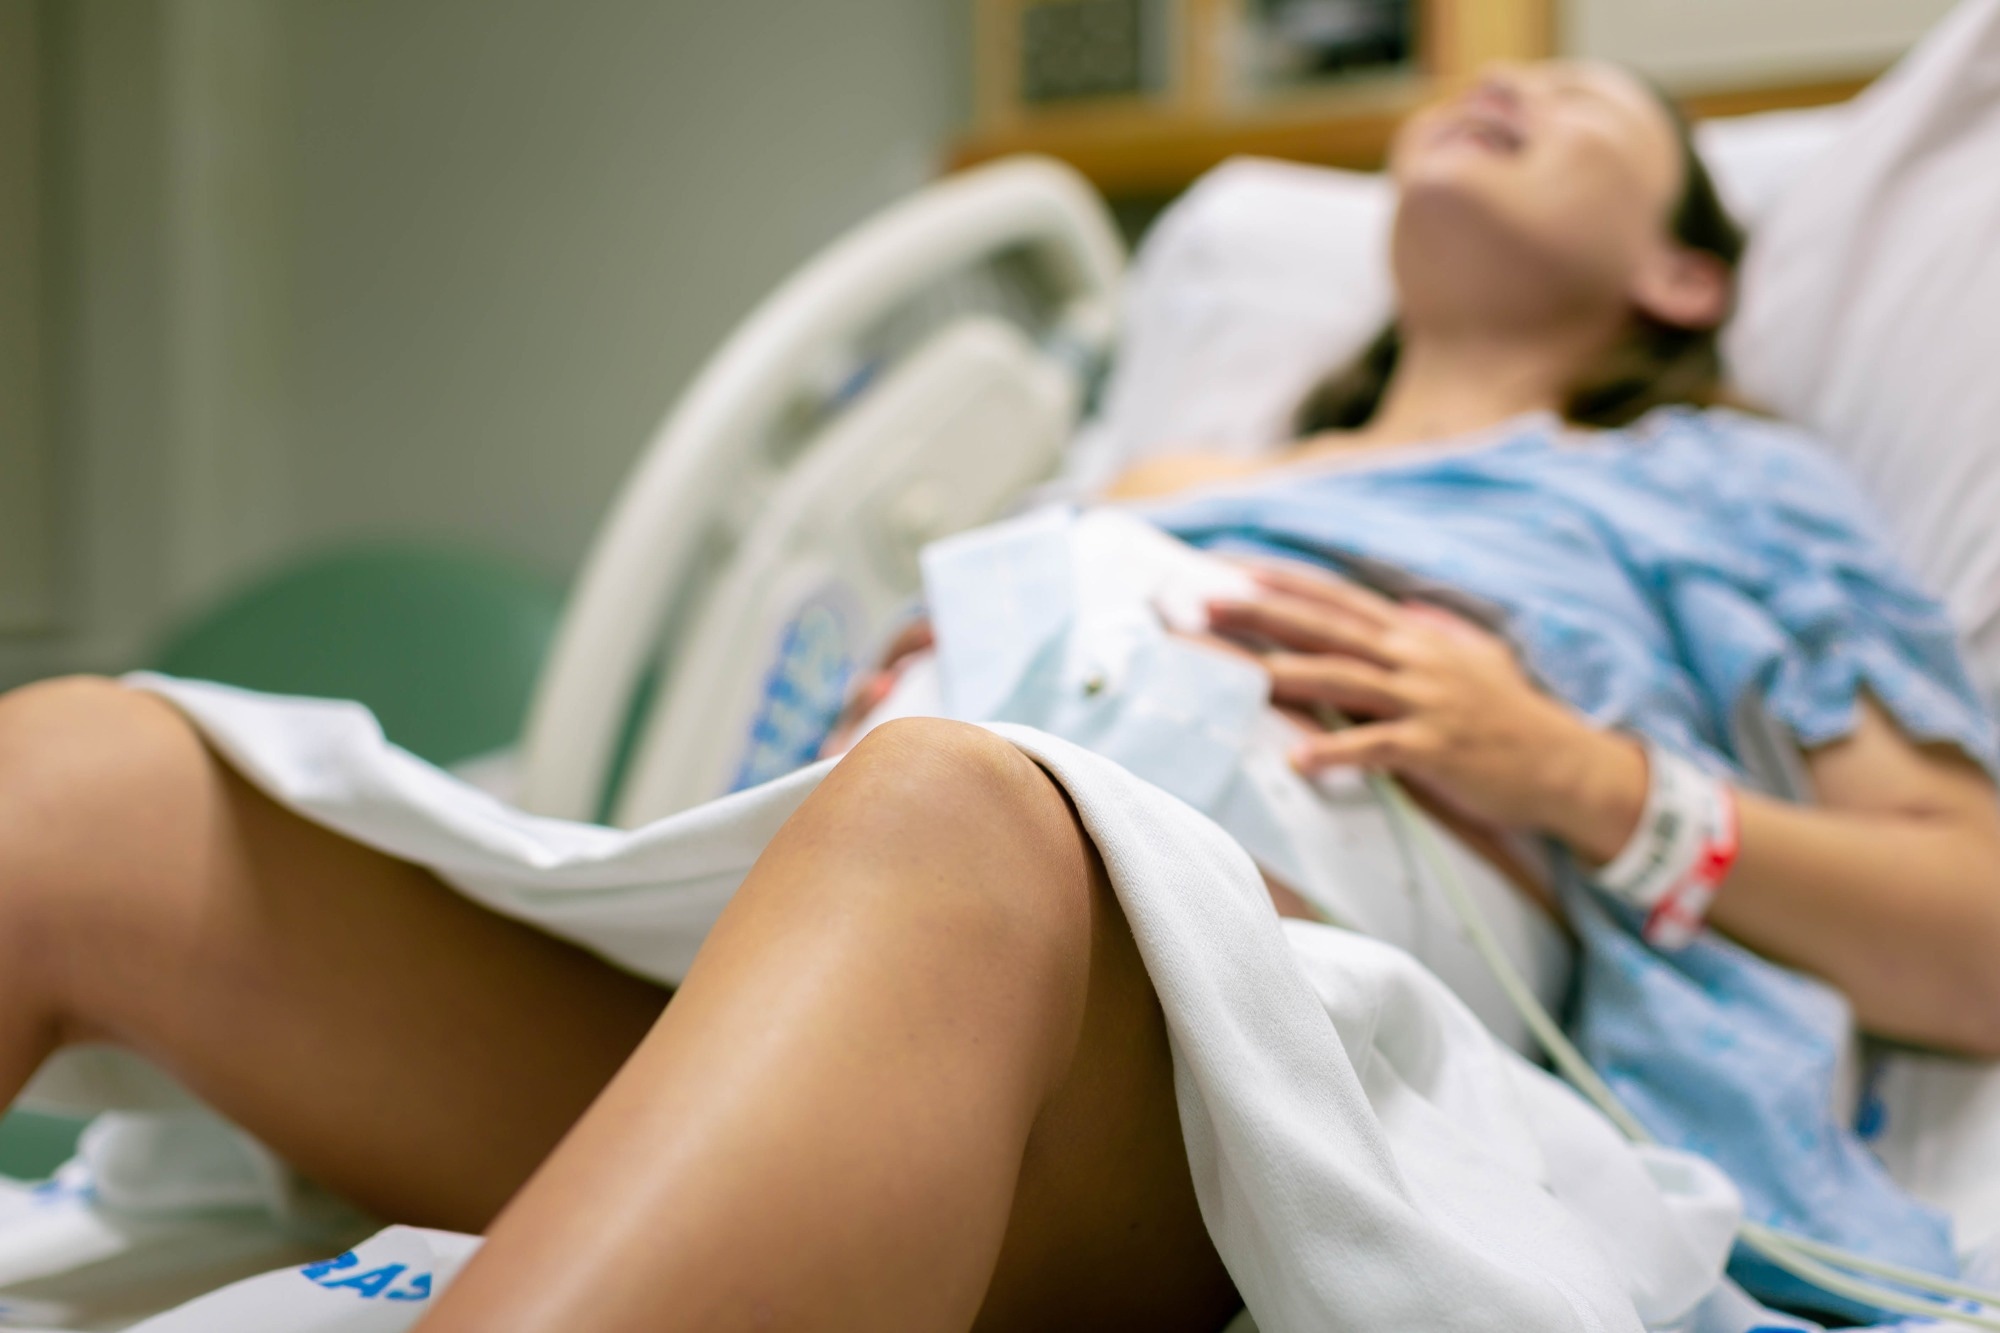 Study: A Systematic Review of Interventions for Prevention and Treatment of Post-Traumatic Stress Disorder Following Childbirth. Image Credit: christinarosepix/Shutterstock.com